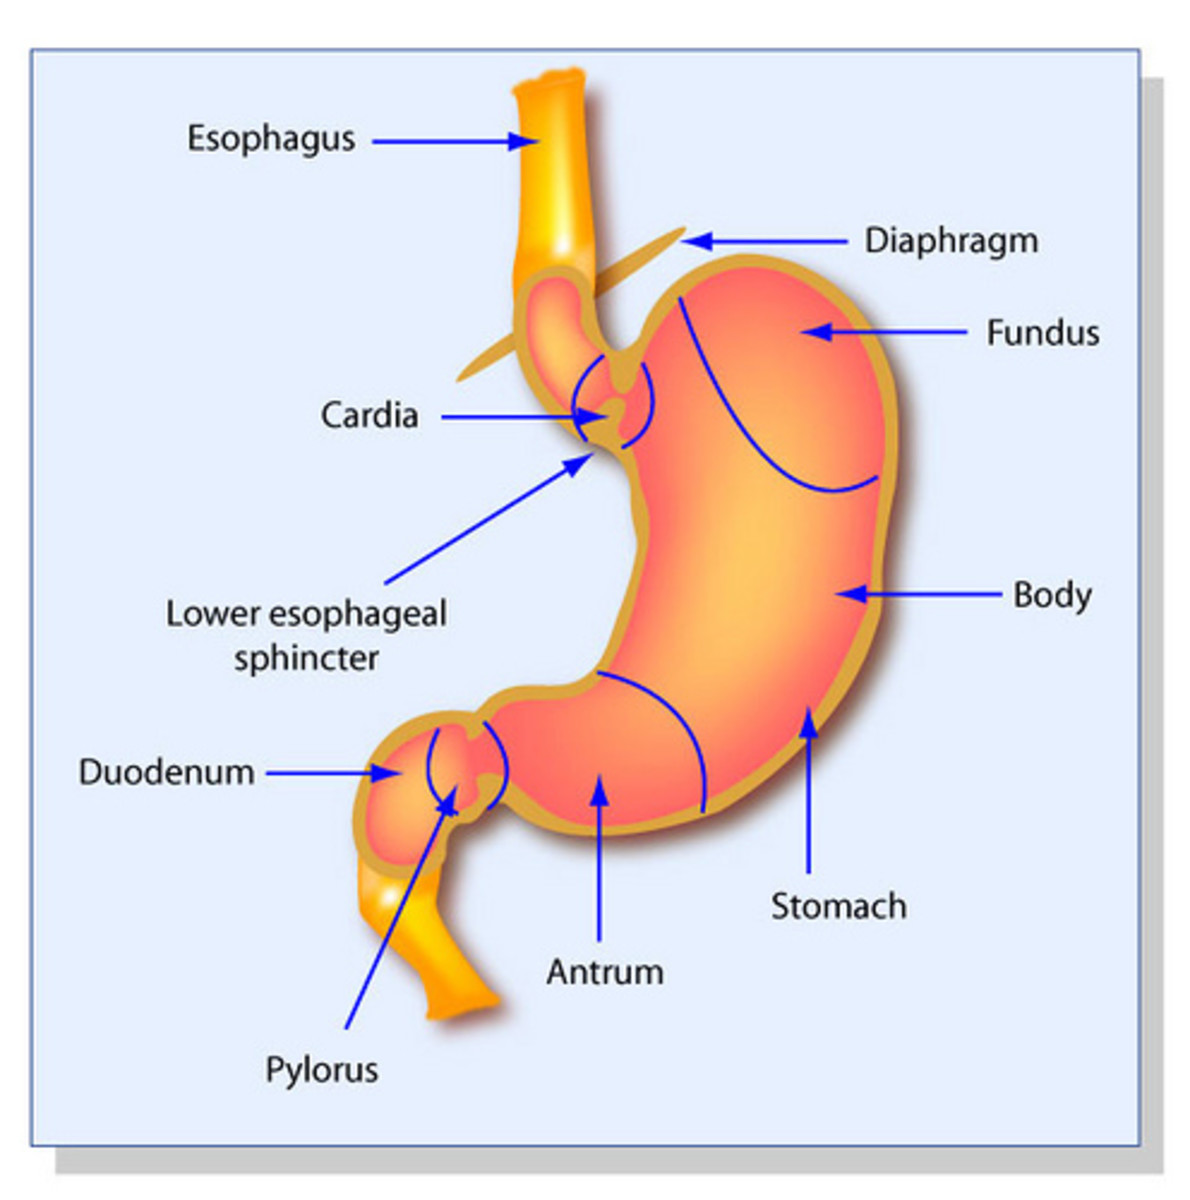 Acid reflux symptoms can involve the stomach or esophagus.